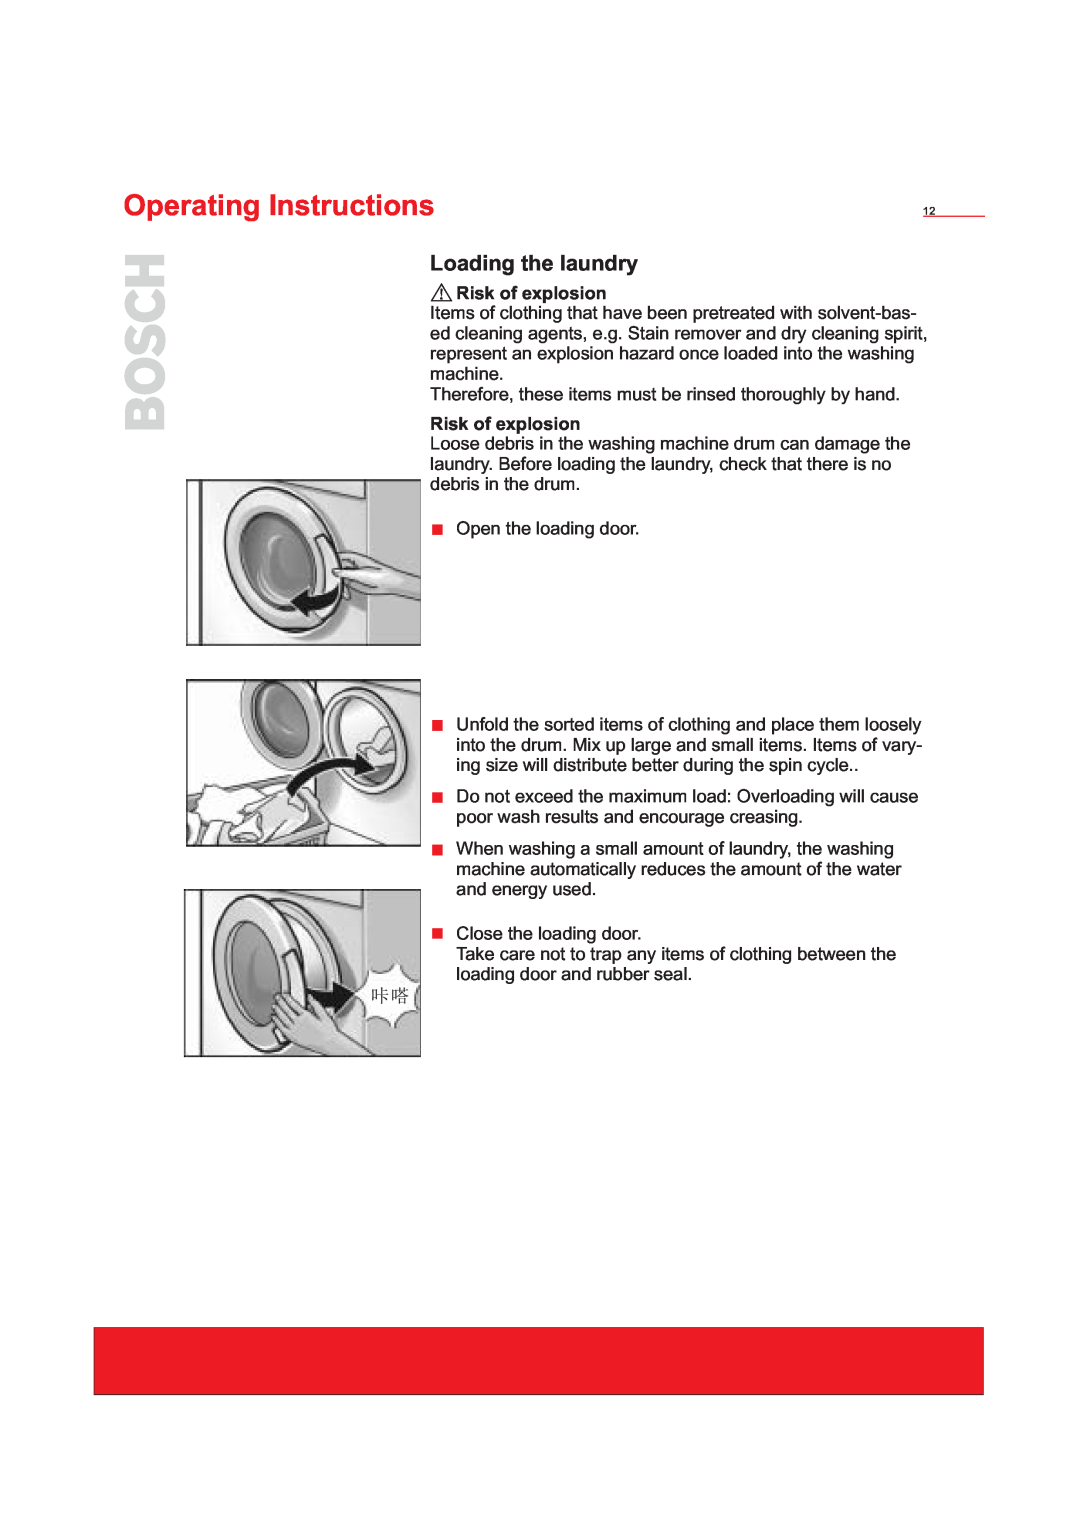 Bosch Appliances WFD50818 installation instructions Loading the laundry, Operating Instructions, Risk of explosion 